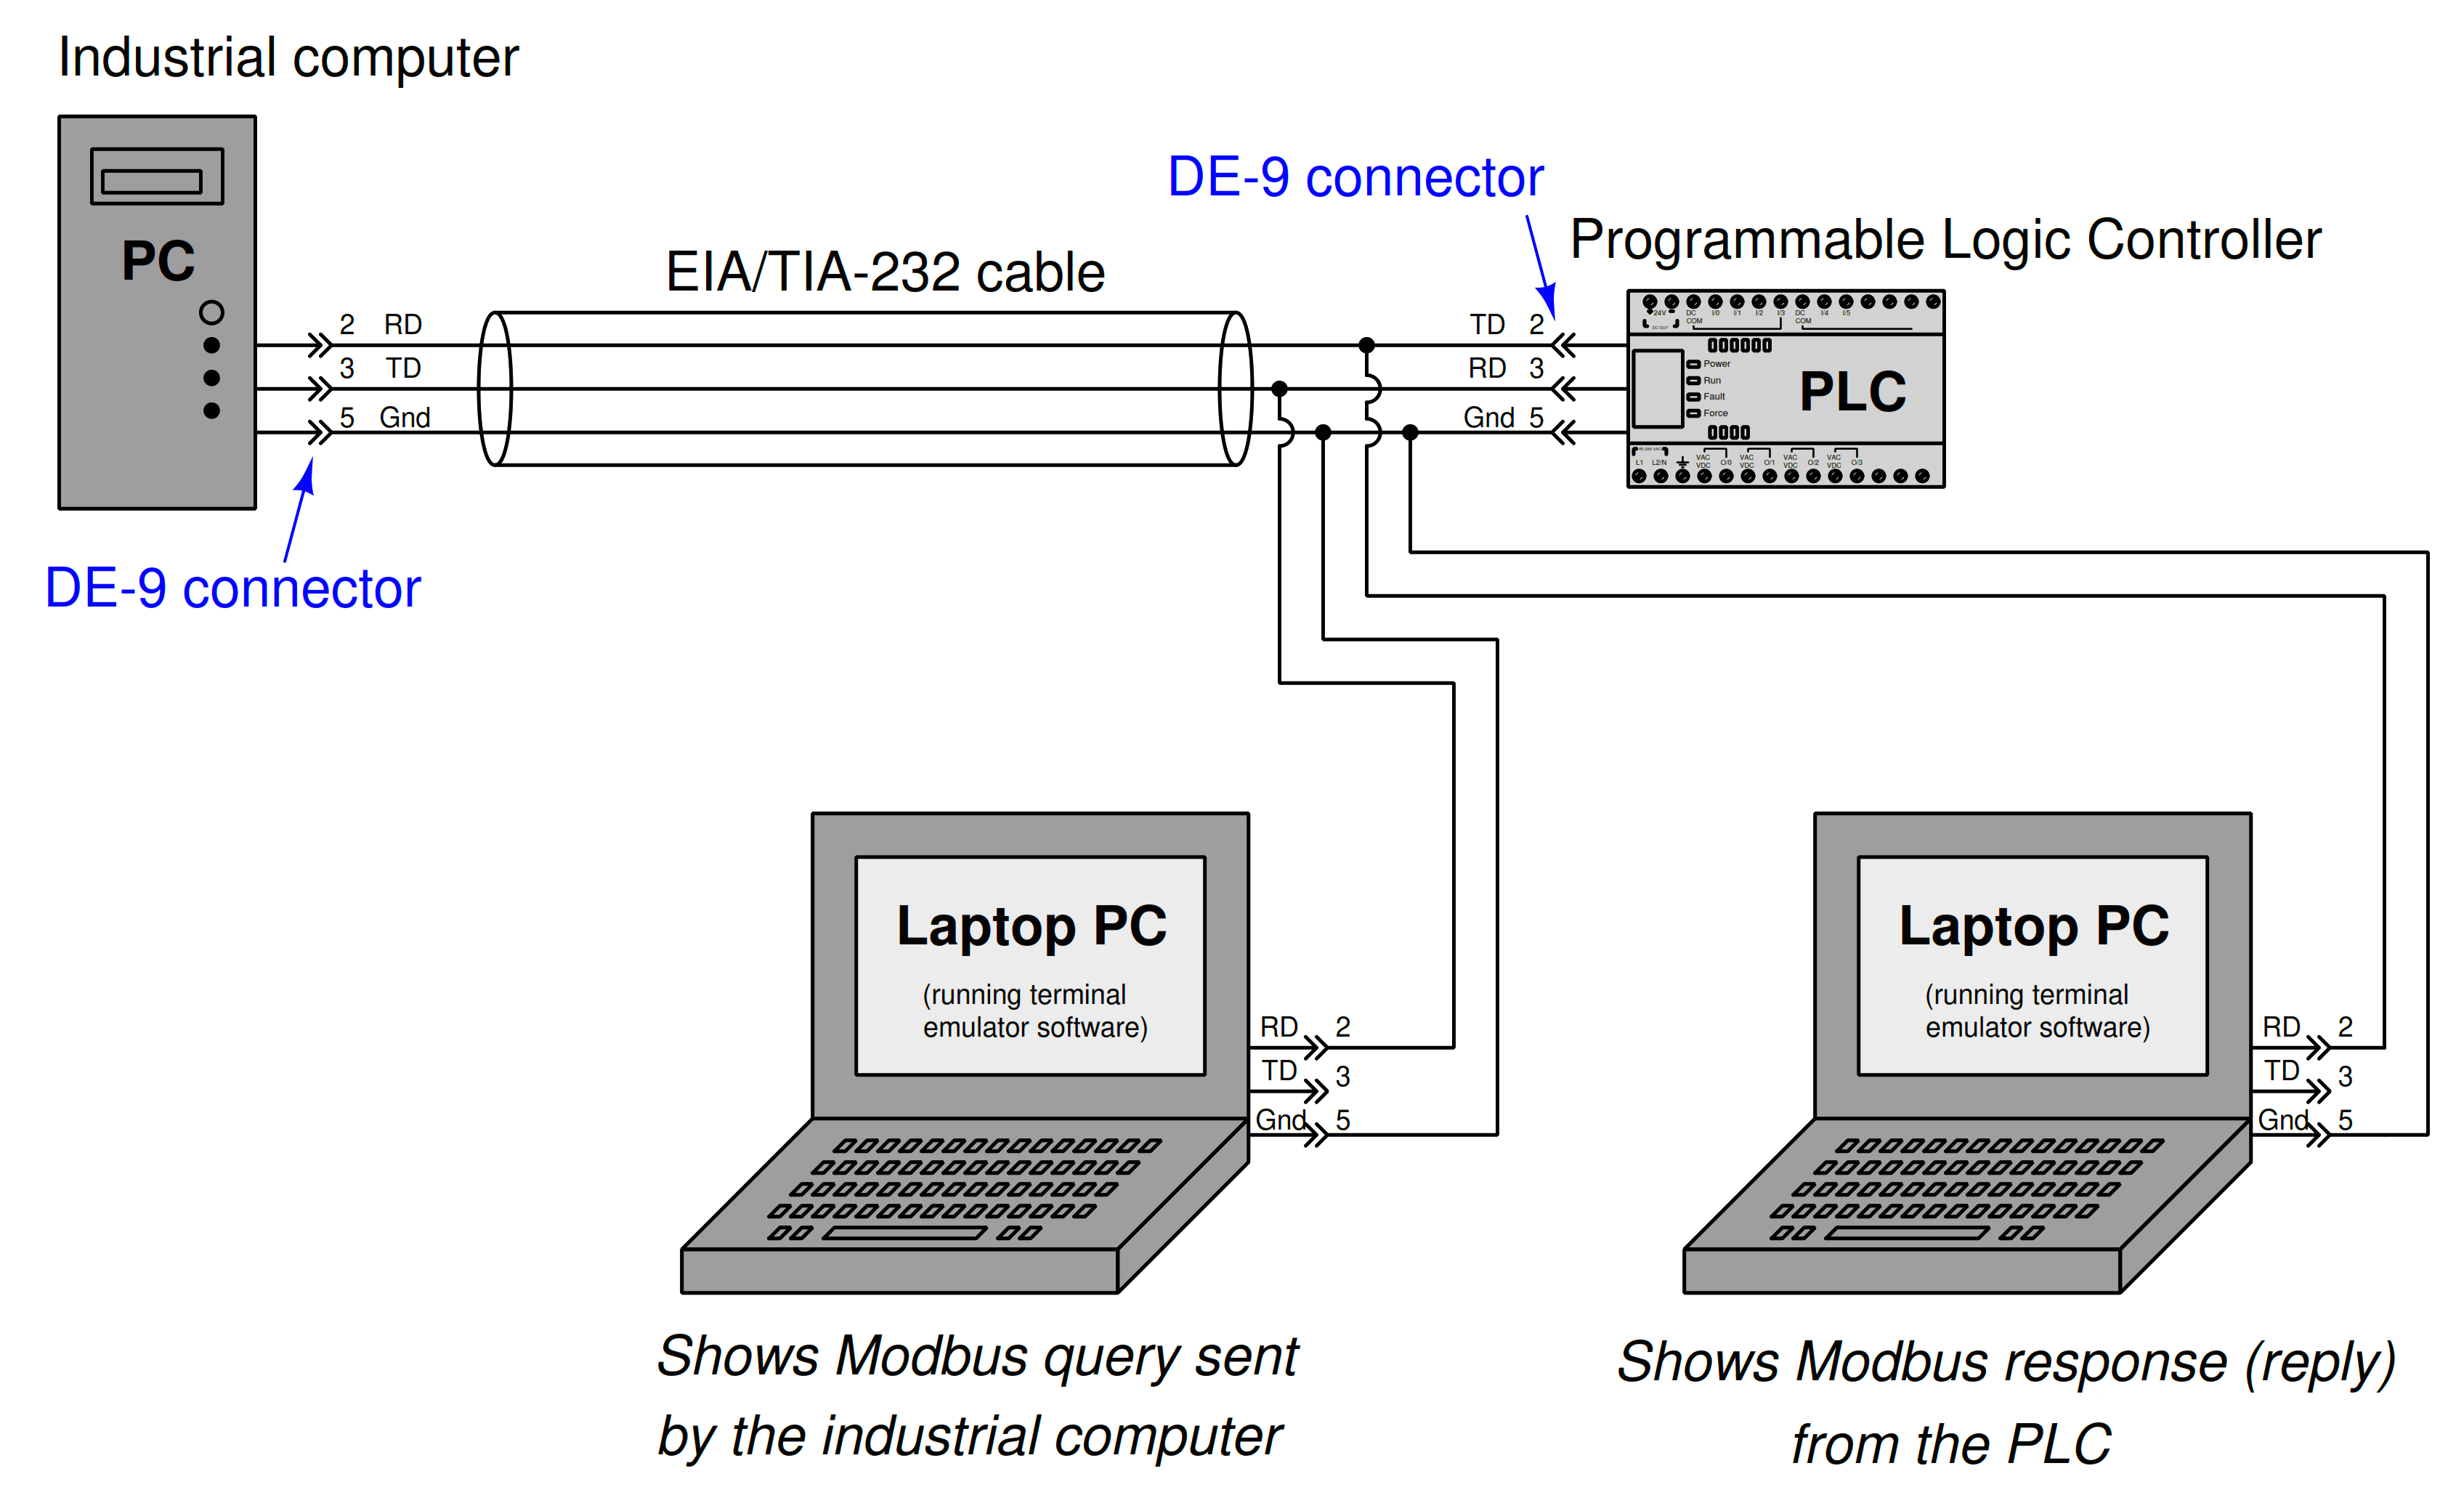 Industrial computer sends a Modbus query to programmable logic controller